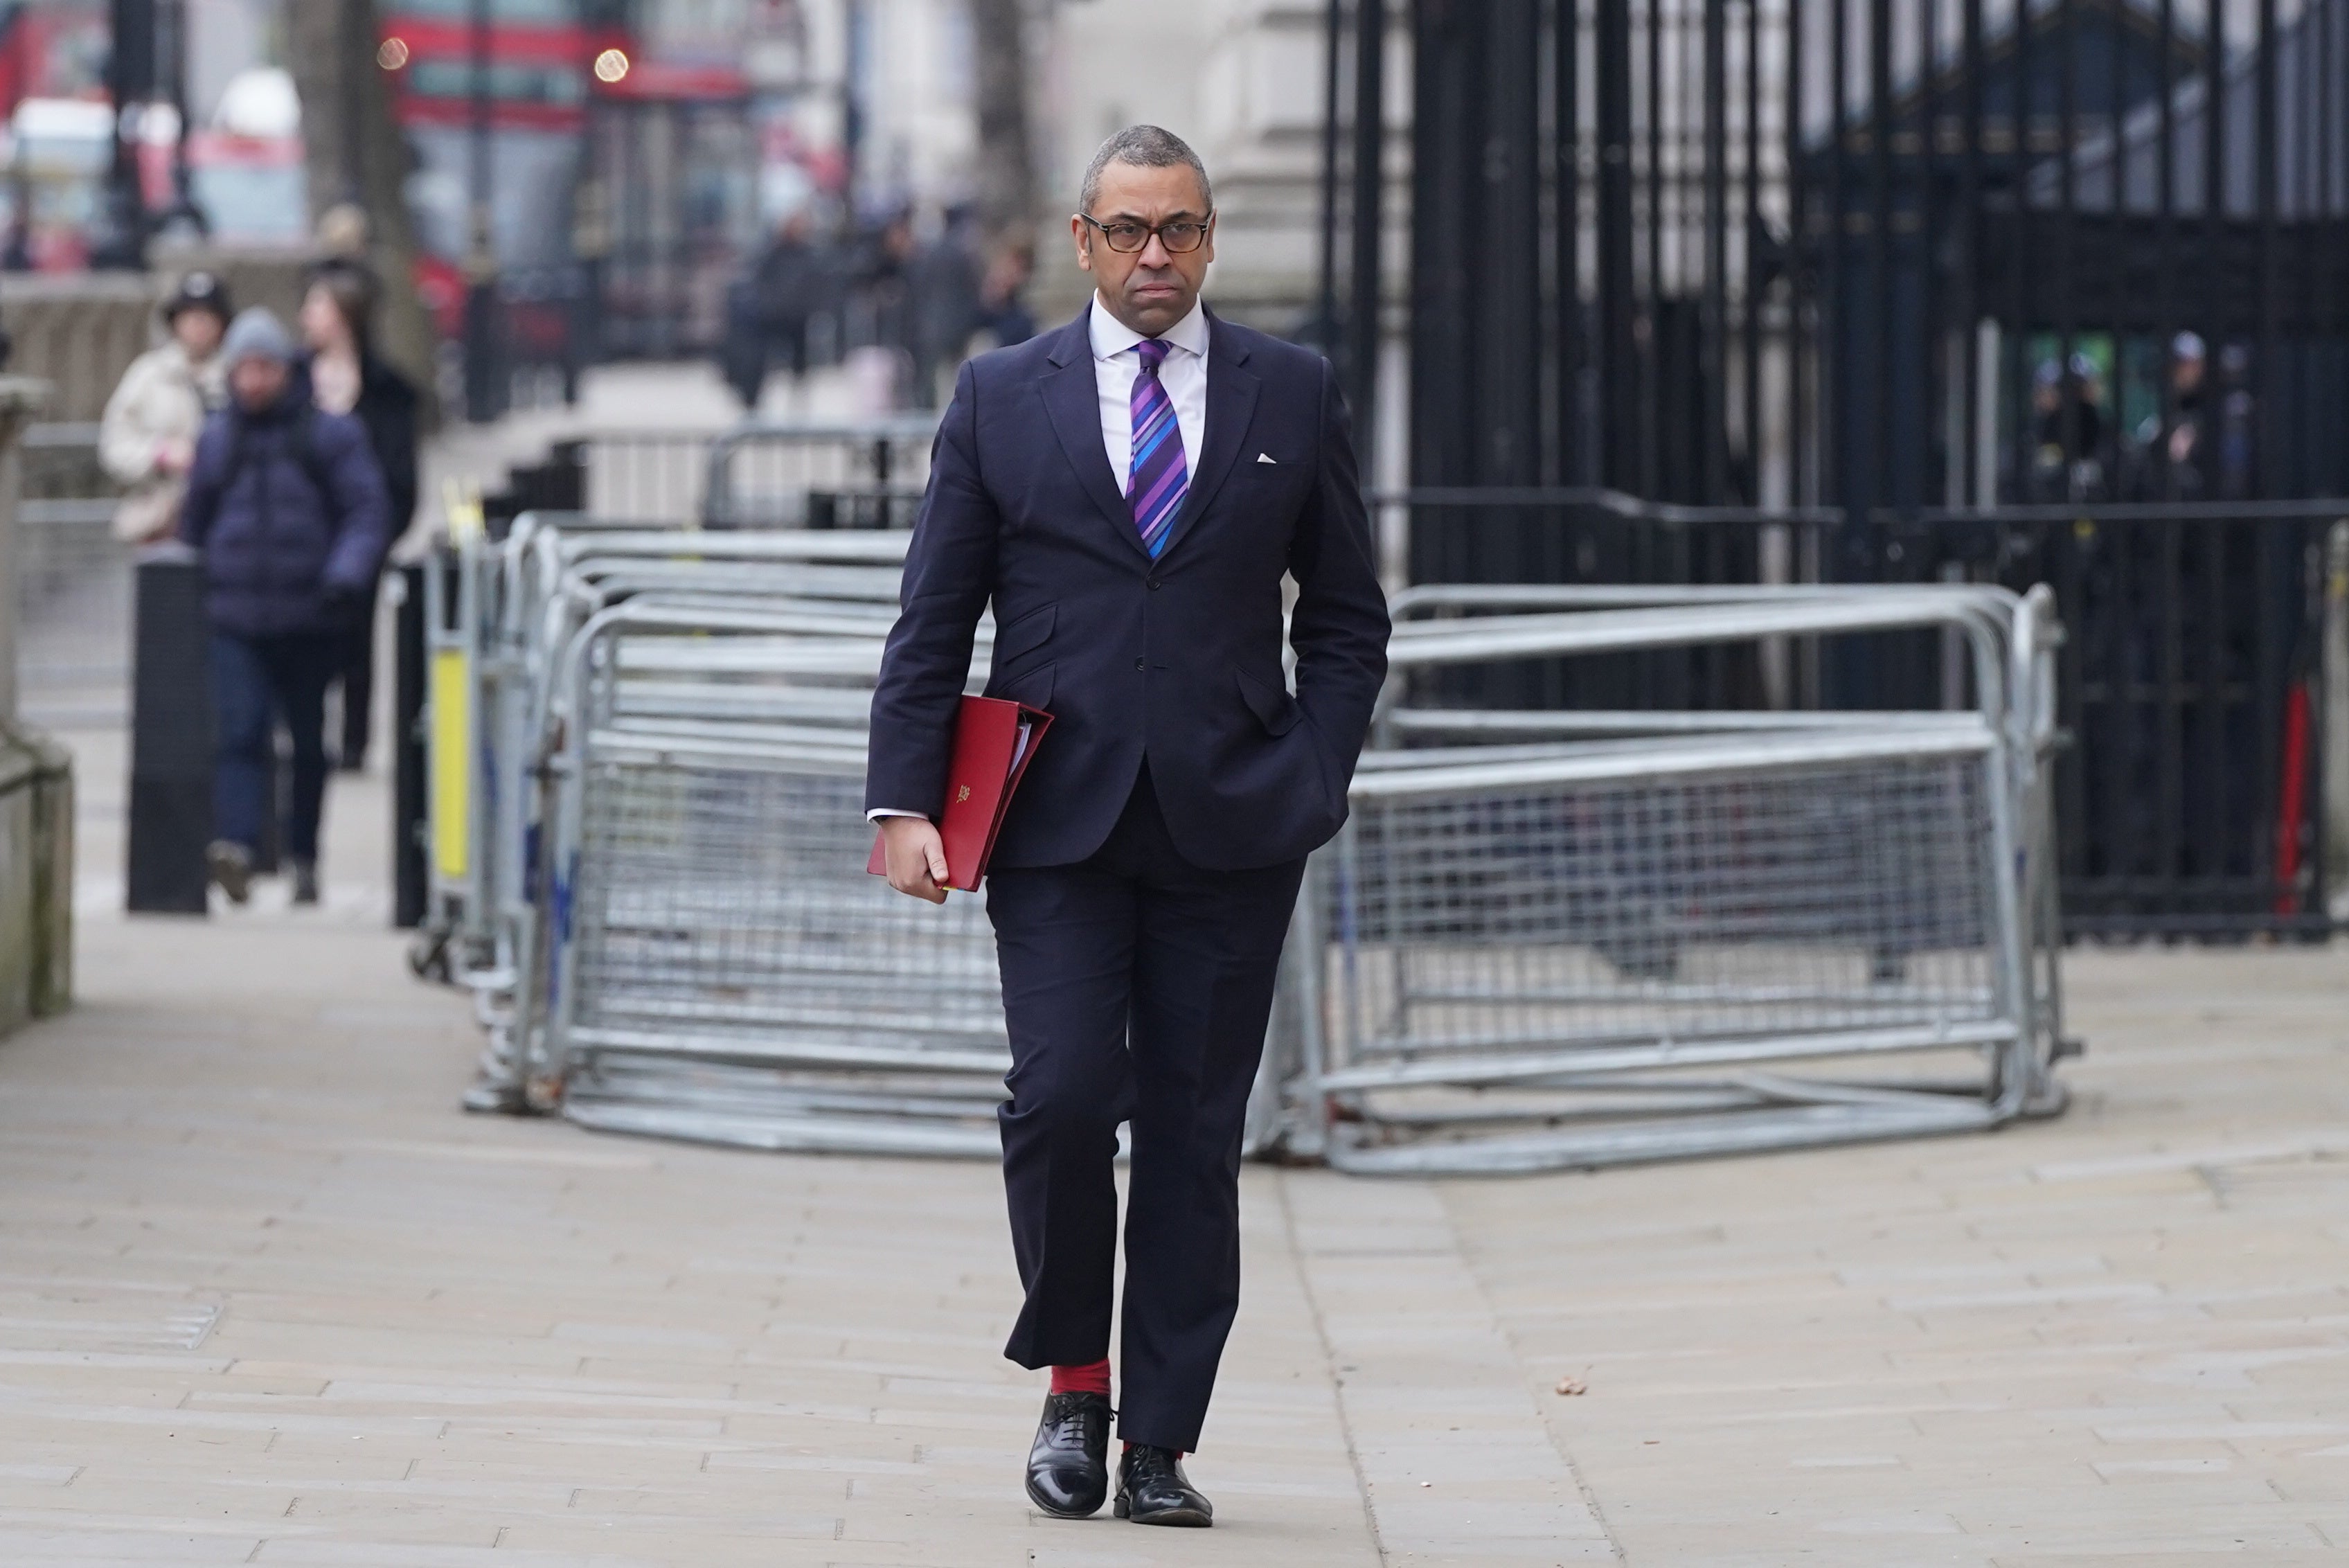 Foreign Office minister James Cleverly said the UK has not had any statements from China denouncing Russia’s invasion of Ukraine (Stefan Rousseau/PA)